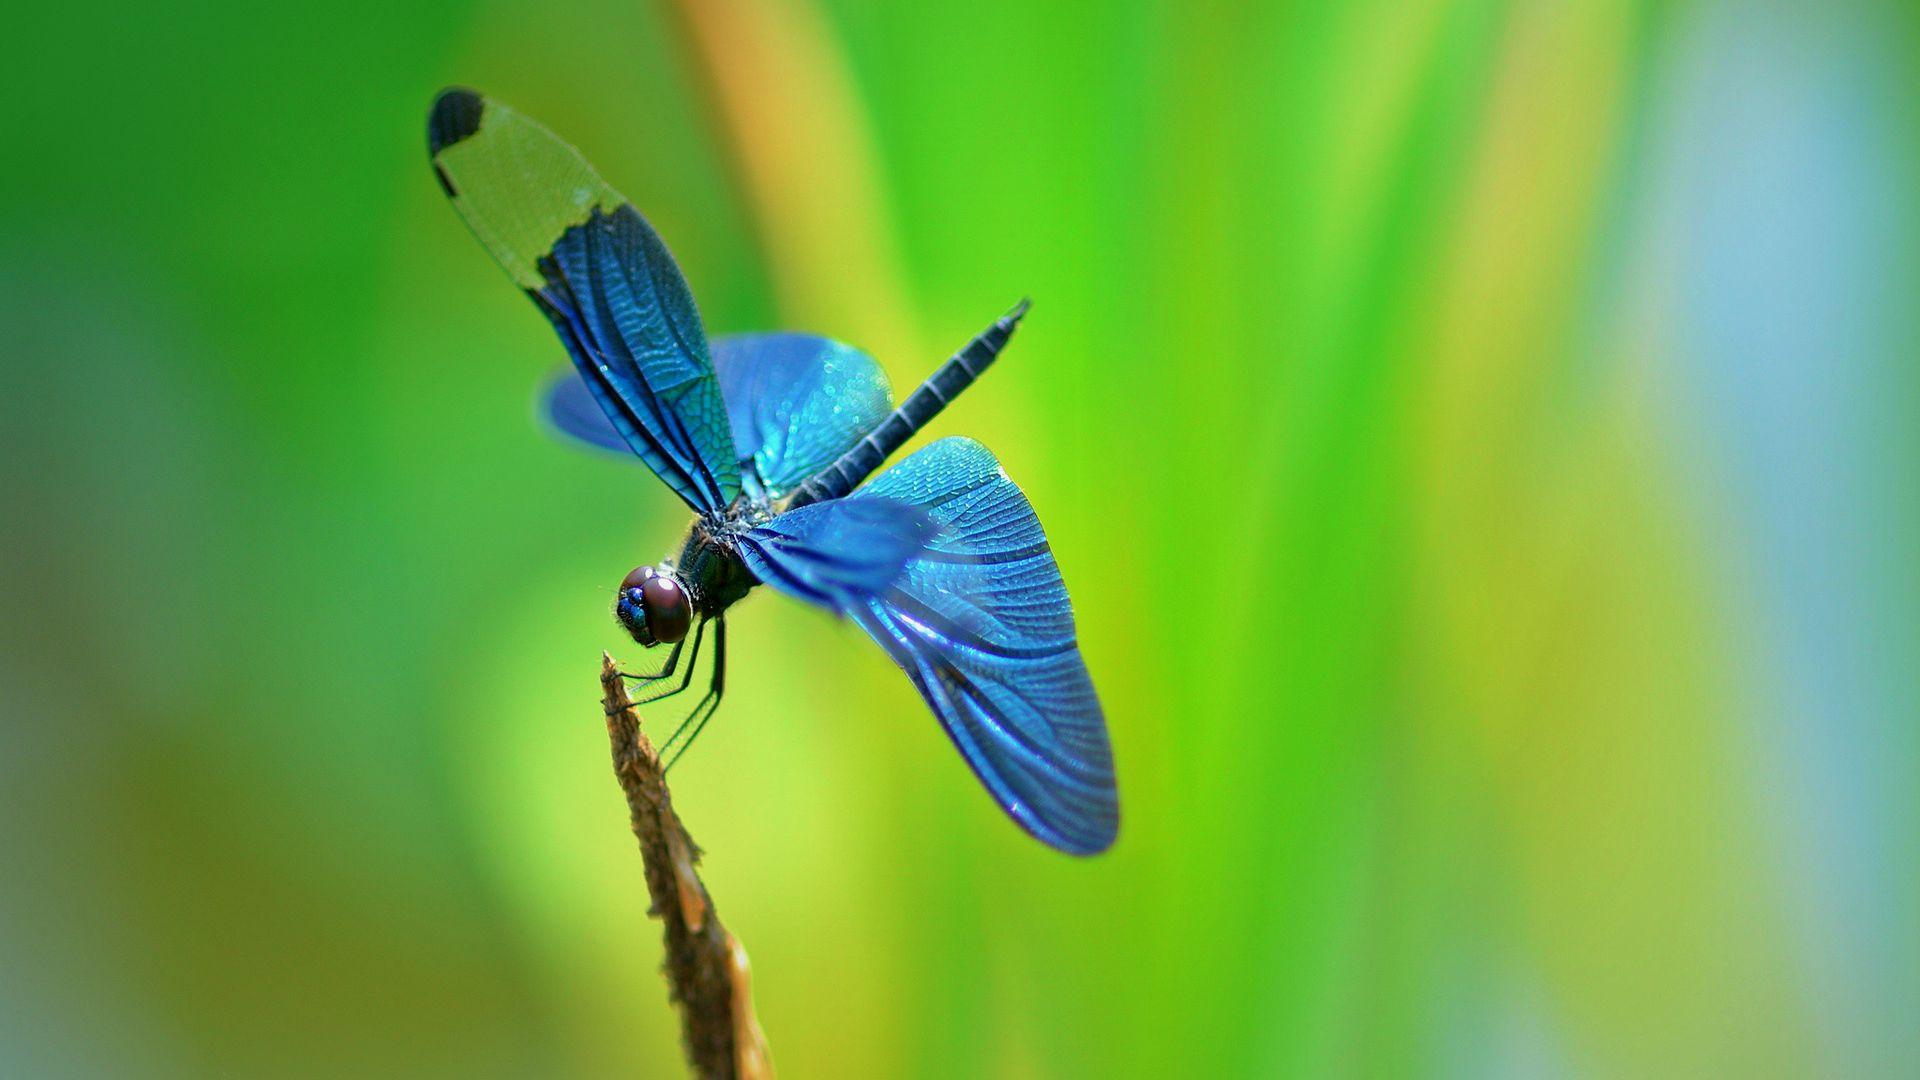 Blue Dragonfly HD Wallpaper, Background Image